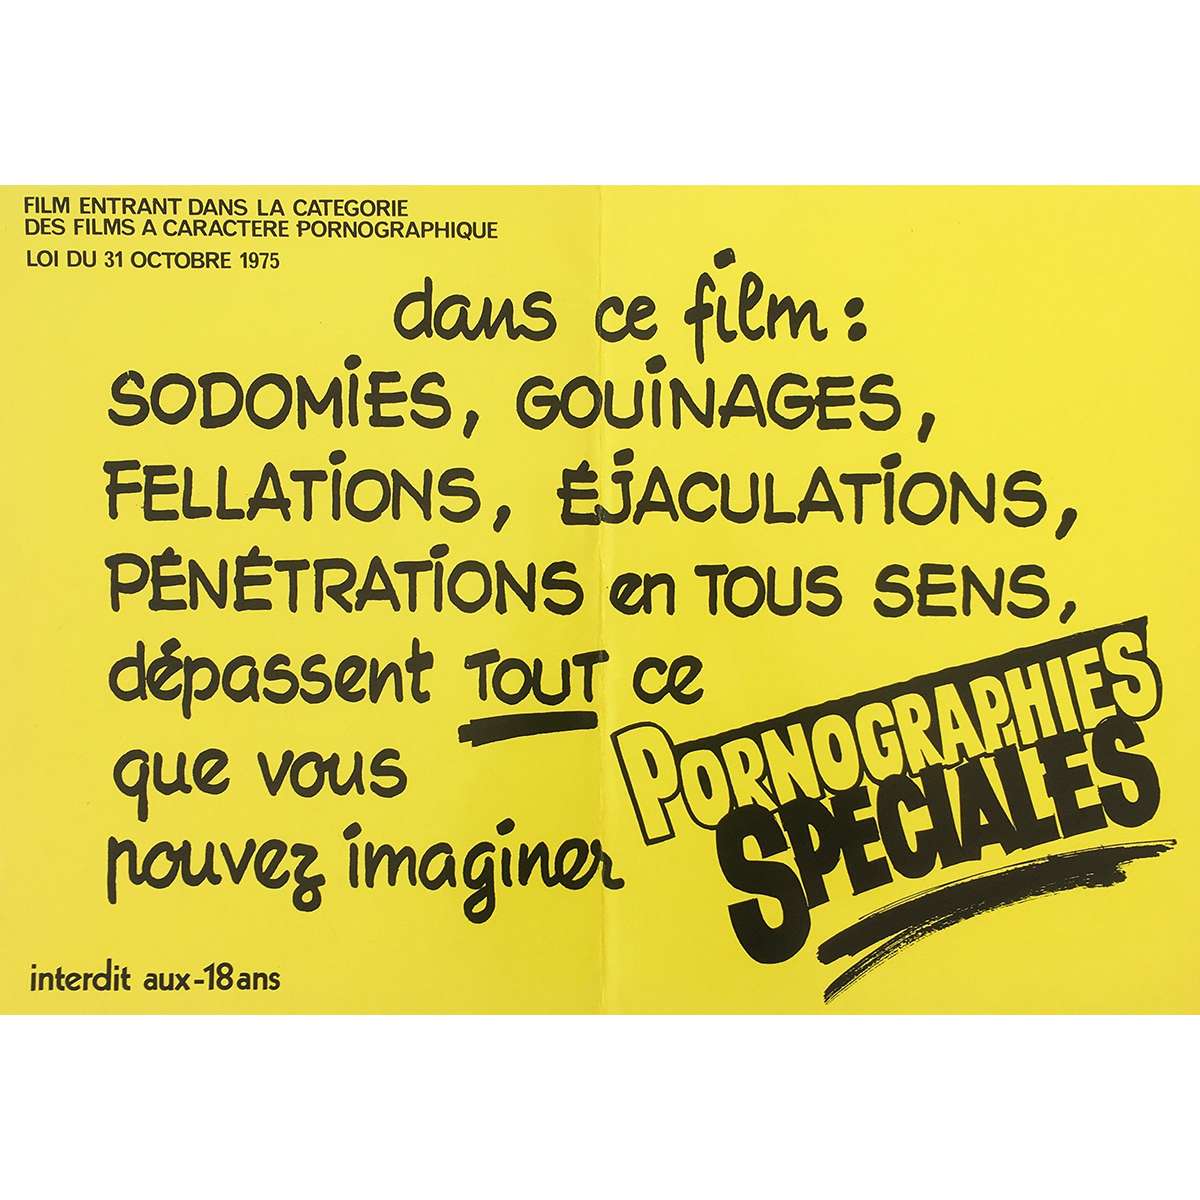 Pornographies - PORNOGRAPHIES SPECIALES French Movie Poster - 12x15 in. - 1970'S Jaune